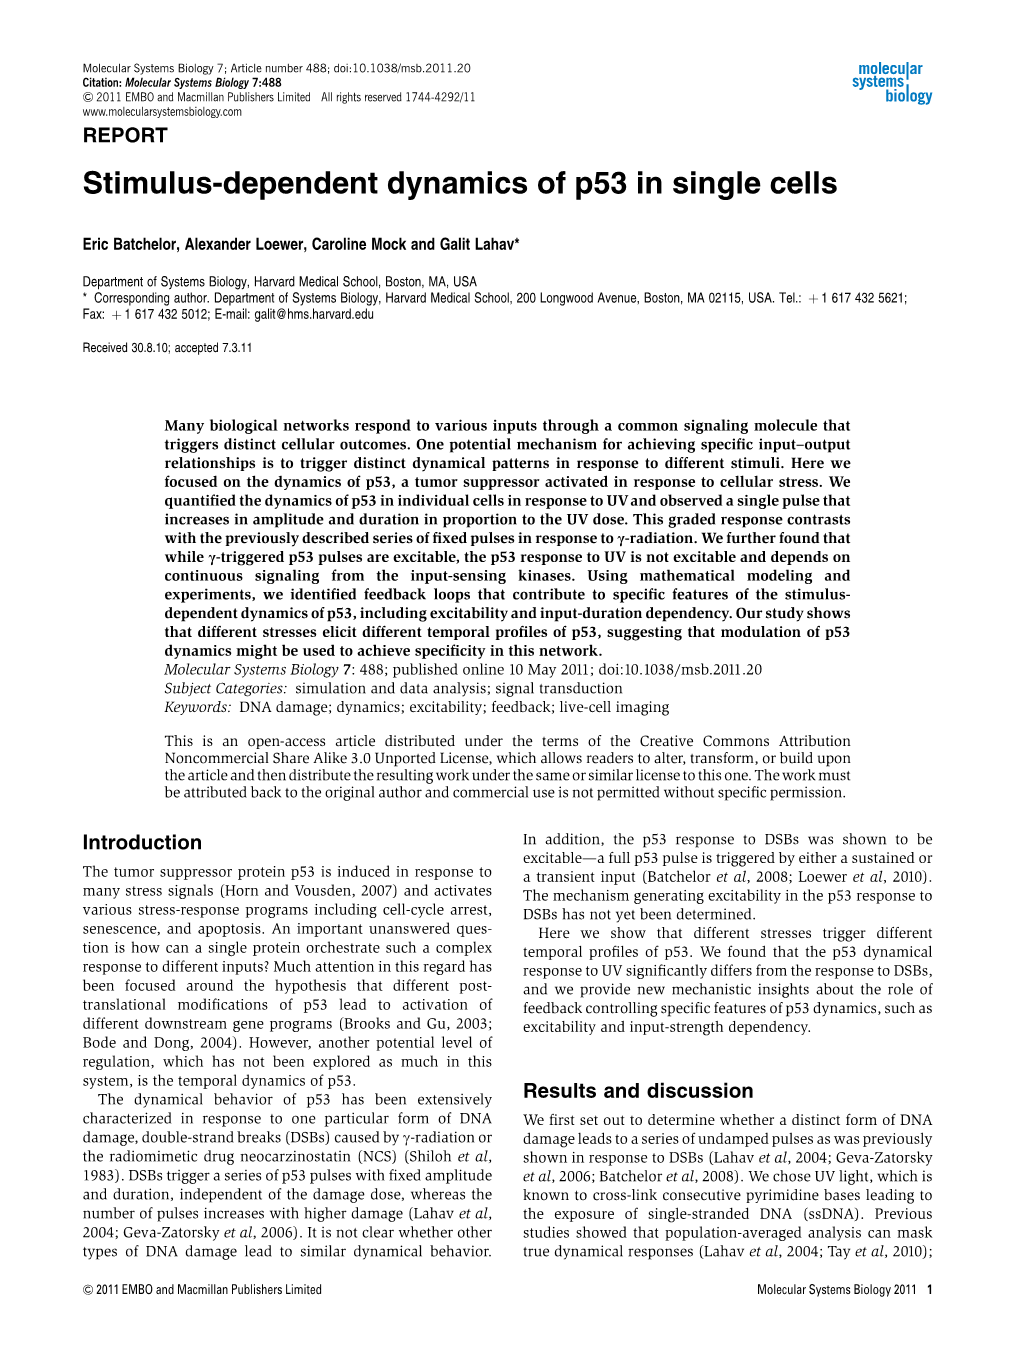 Stimulus‐Dependent Dynamics of P53 in Single Cells